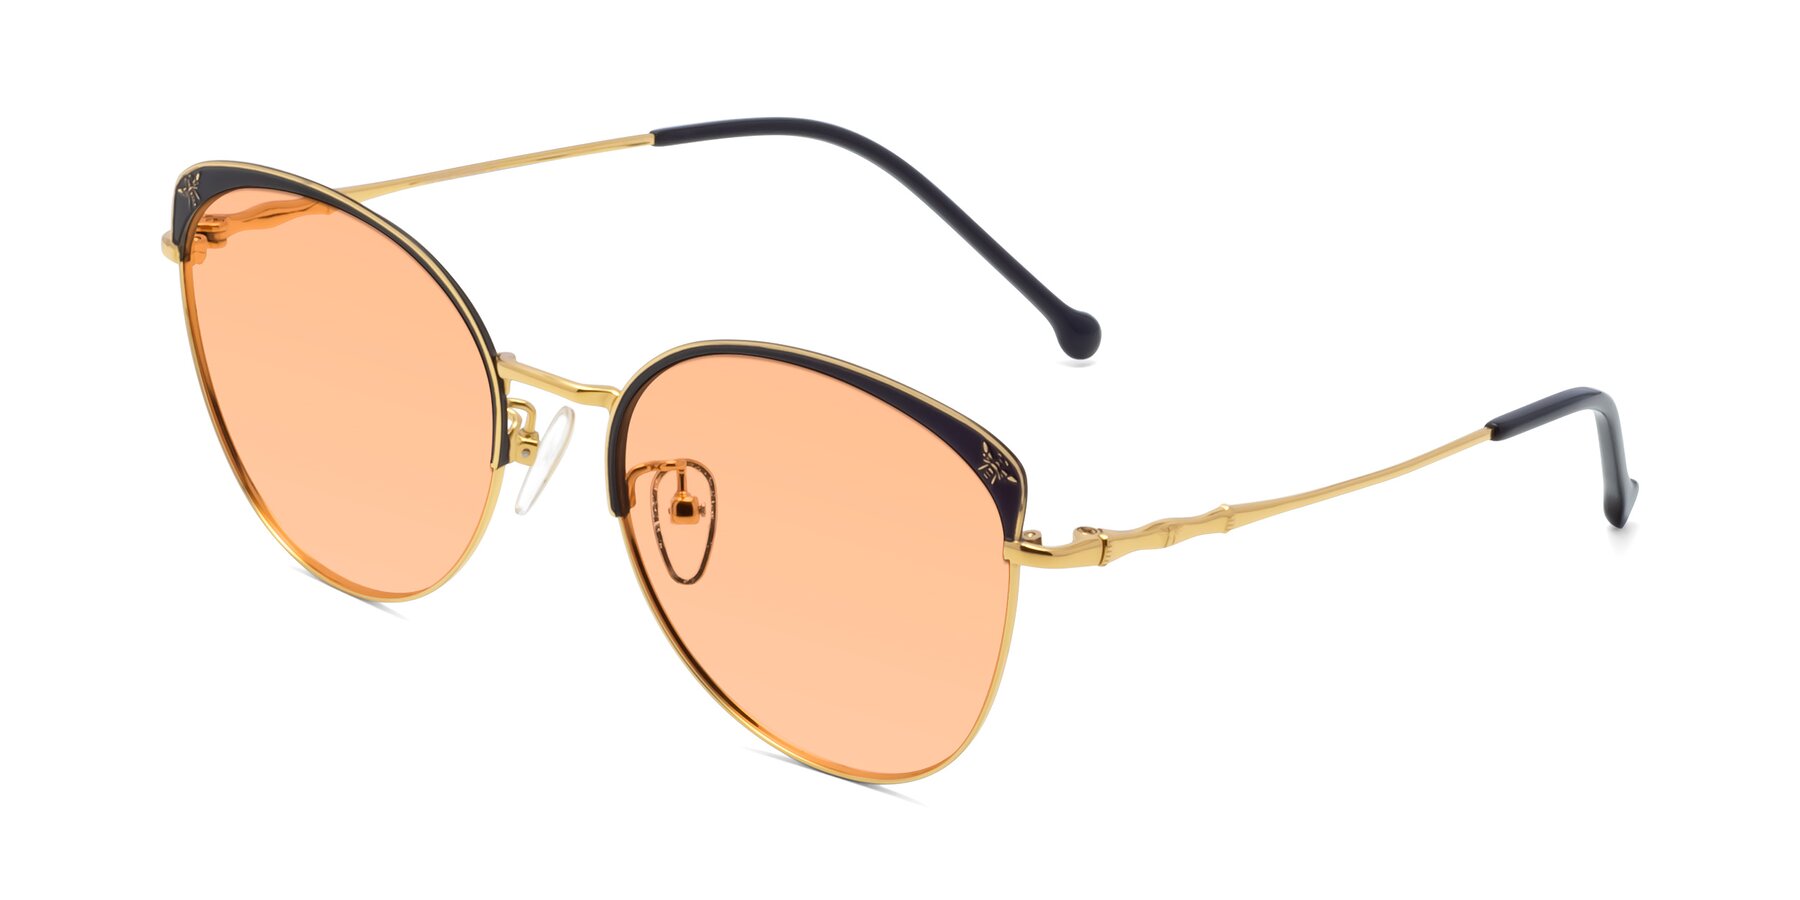 Angle of 18019 in Black-Gold with Light Orange Tinted Lenses